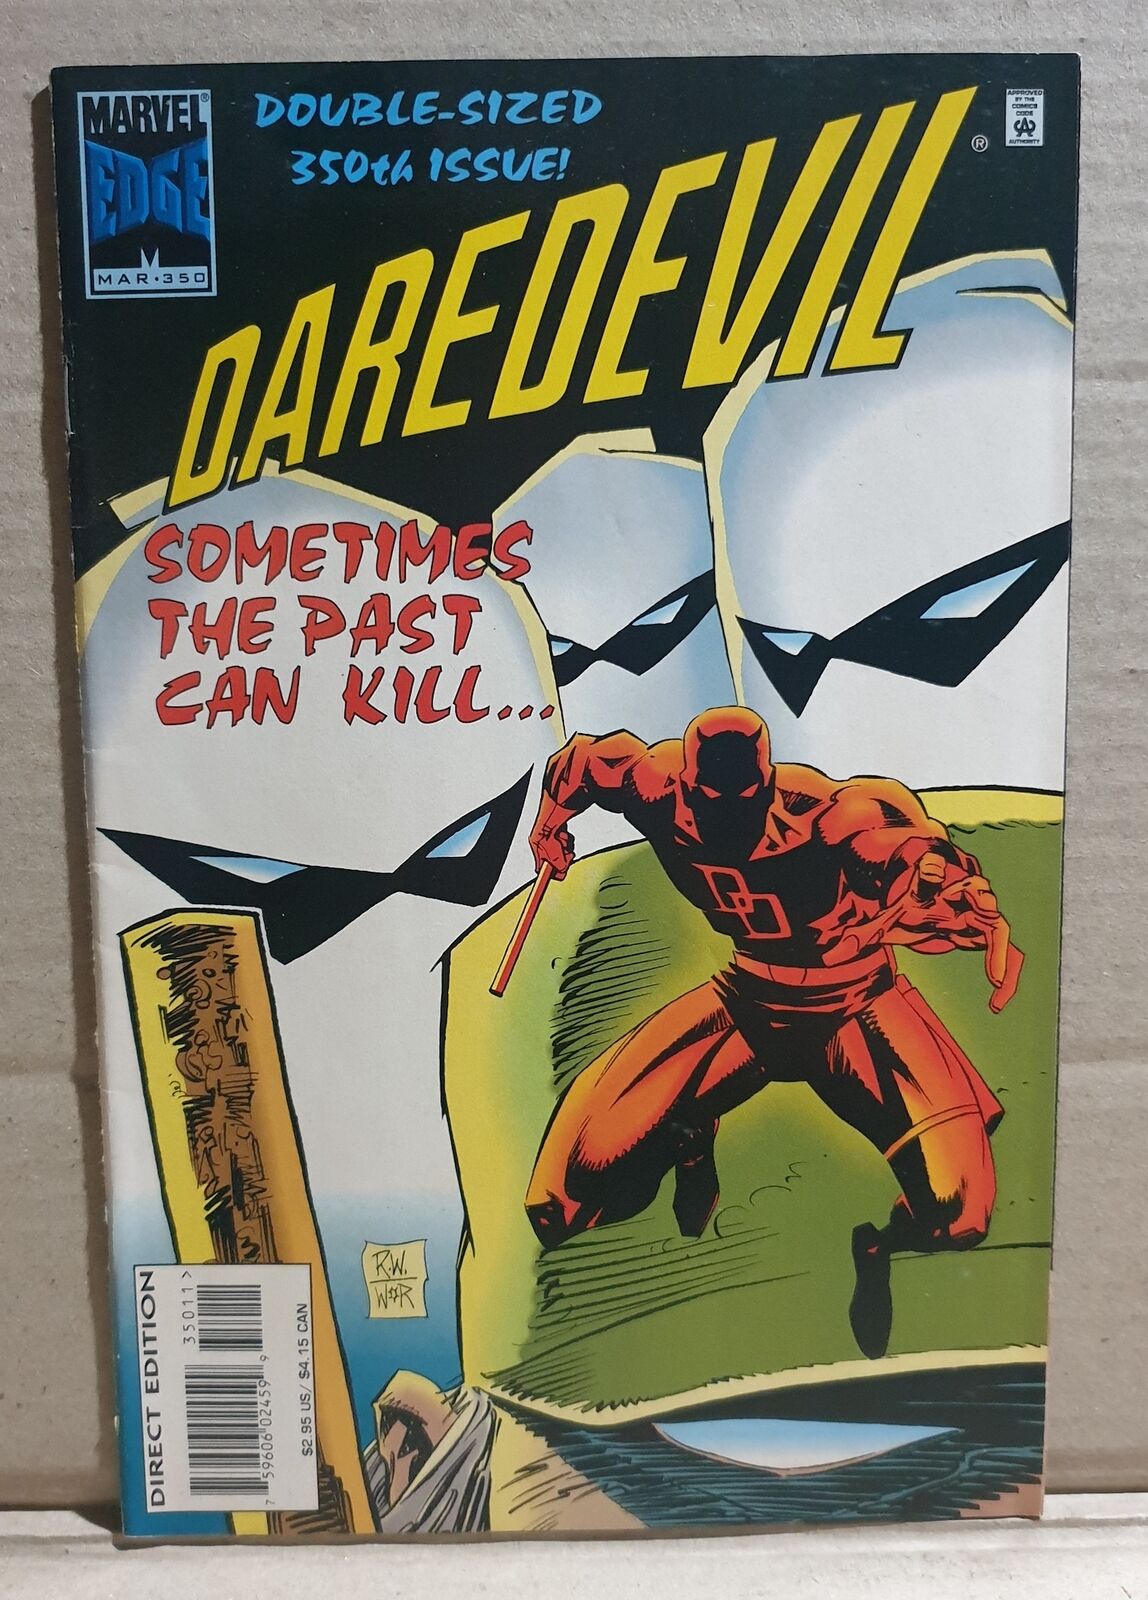 COMIC BOOK -  MARVEL DAREDEVIL THE MAN WITHOUT FEAR #350